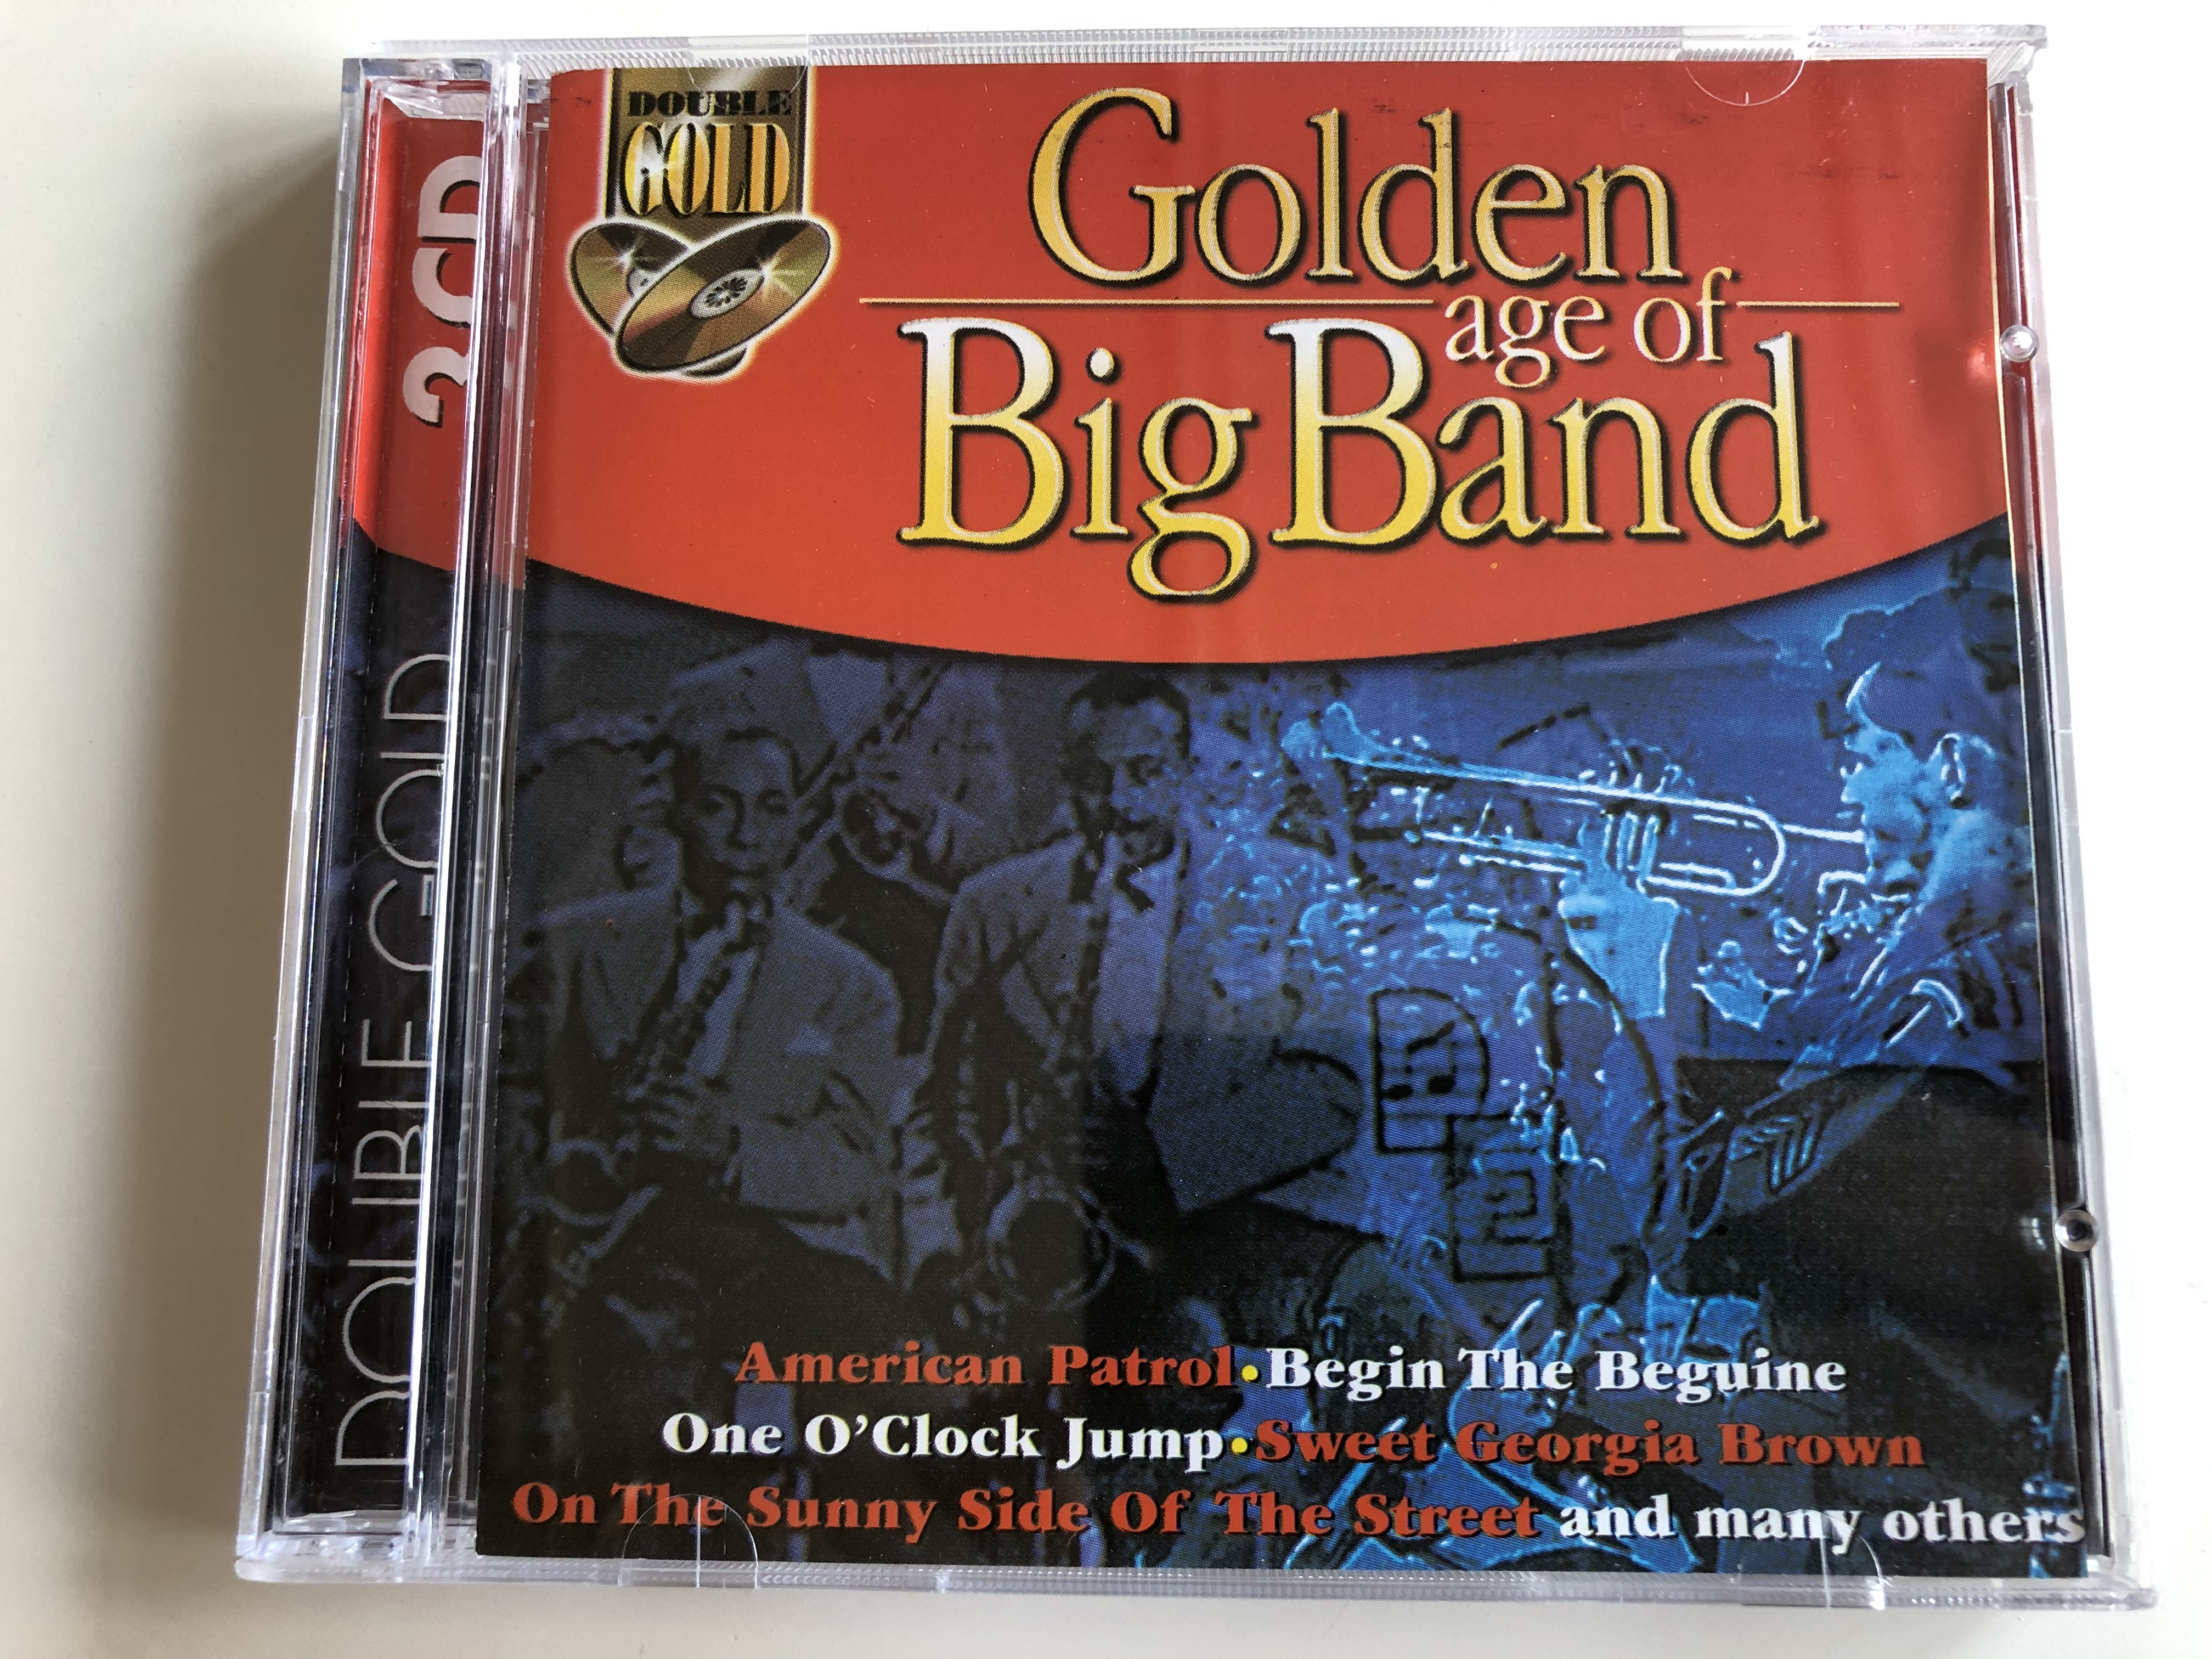 golden-age-of-bigband-american-patrol-begin-the-beguine-one-o-clock-jump-sweet-georgia-brown-and-many-others-double-gold-2cd-audio-cd-1999-galaxy-music-3720252-1-.jpg